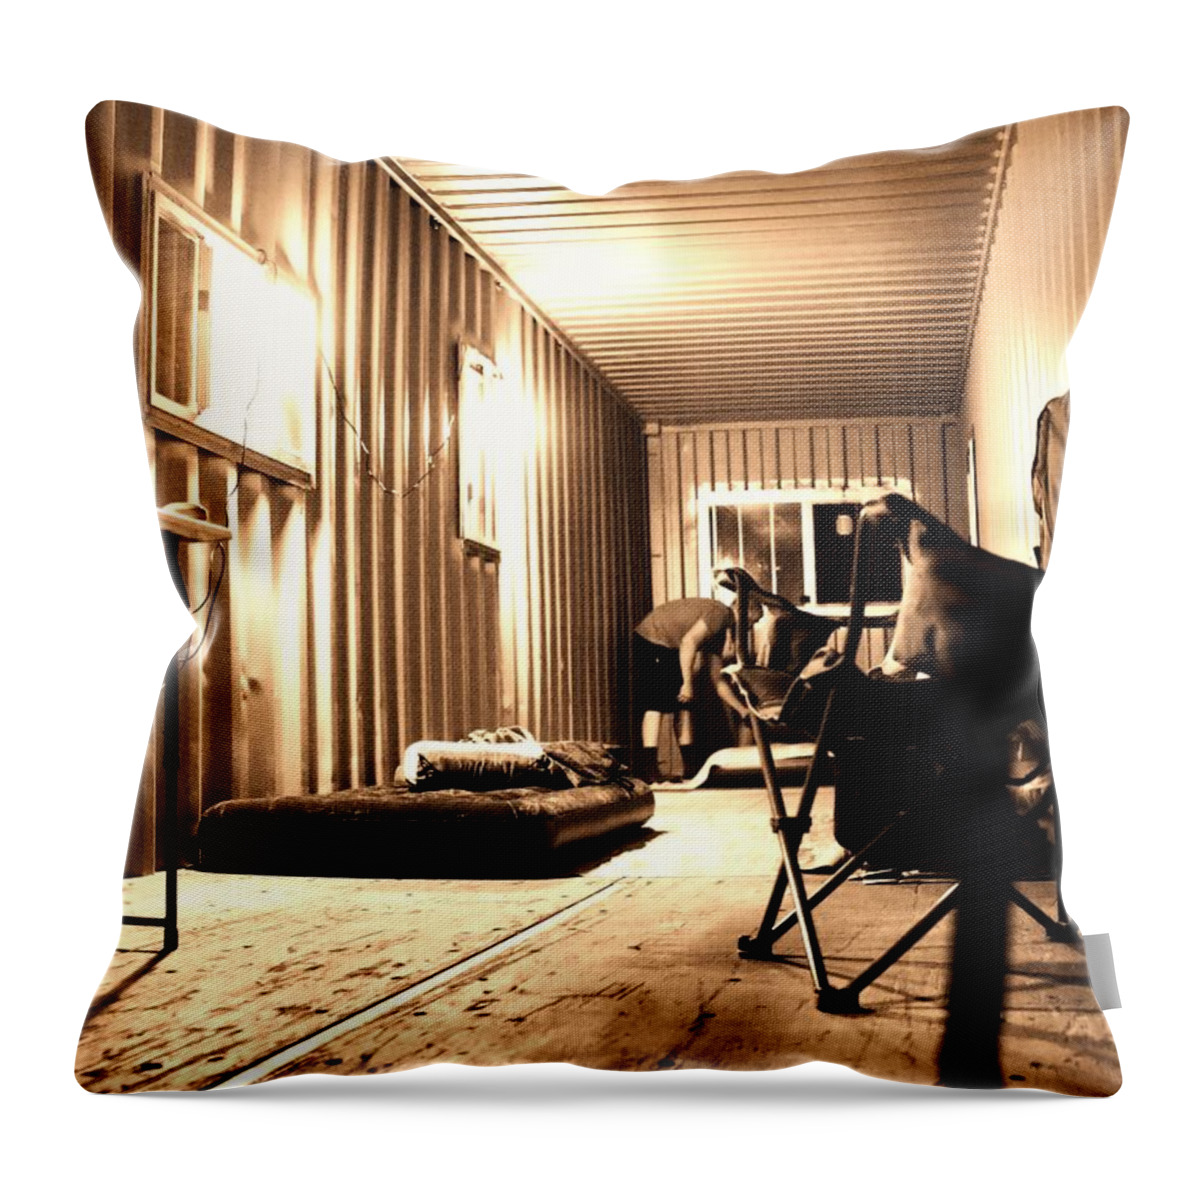 Outback Throw Pillow featuring the photograph Outdoor Living by Michael Blaine